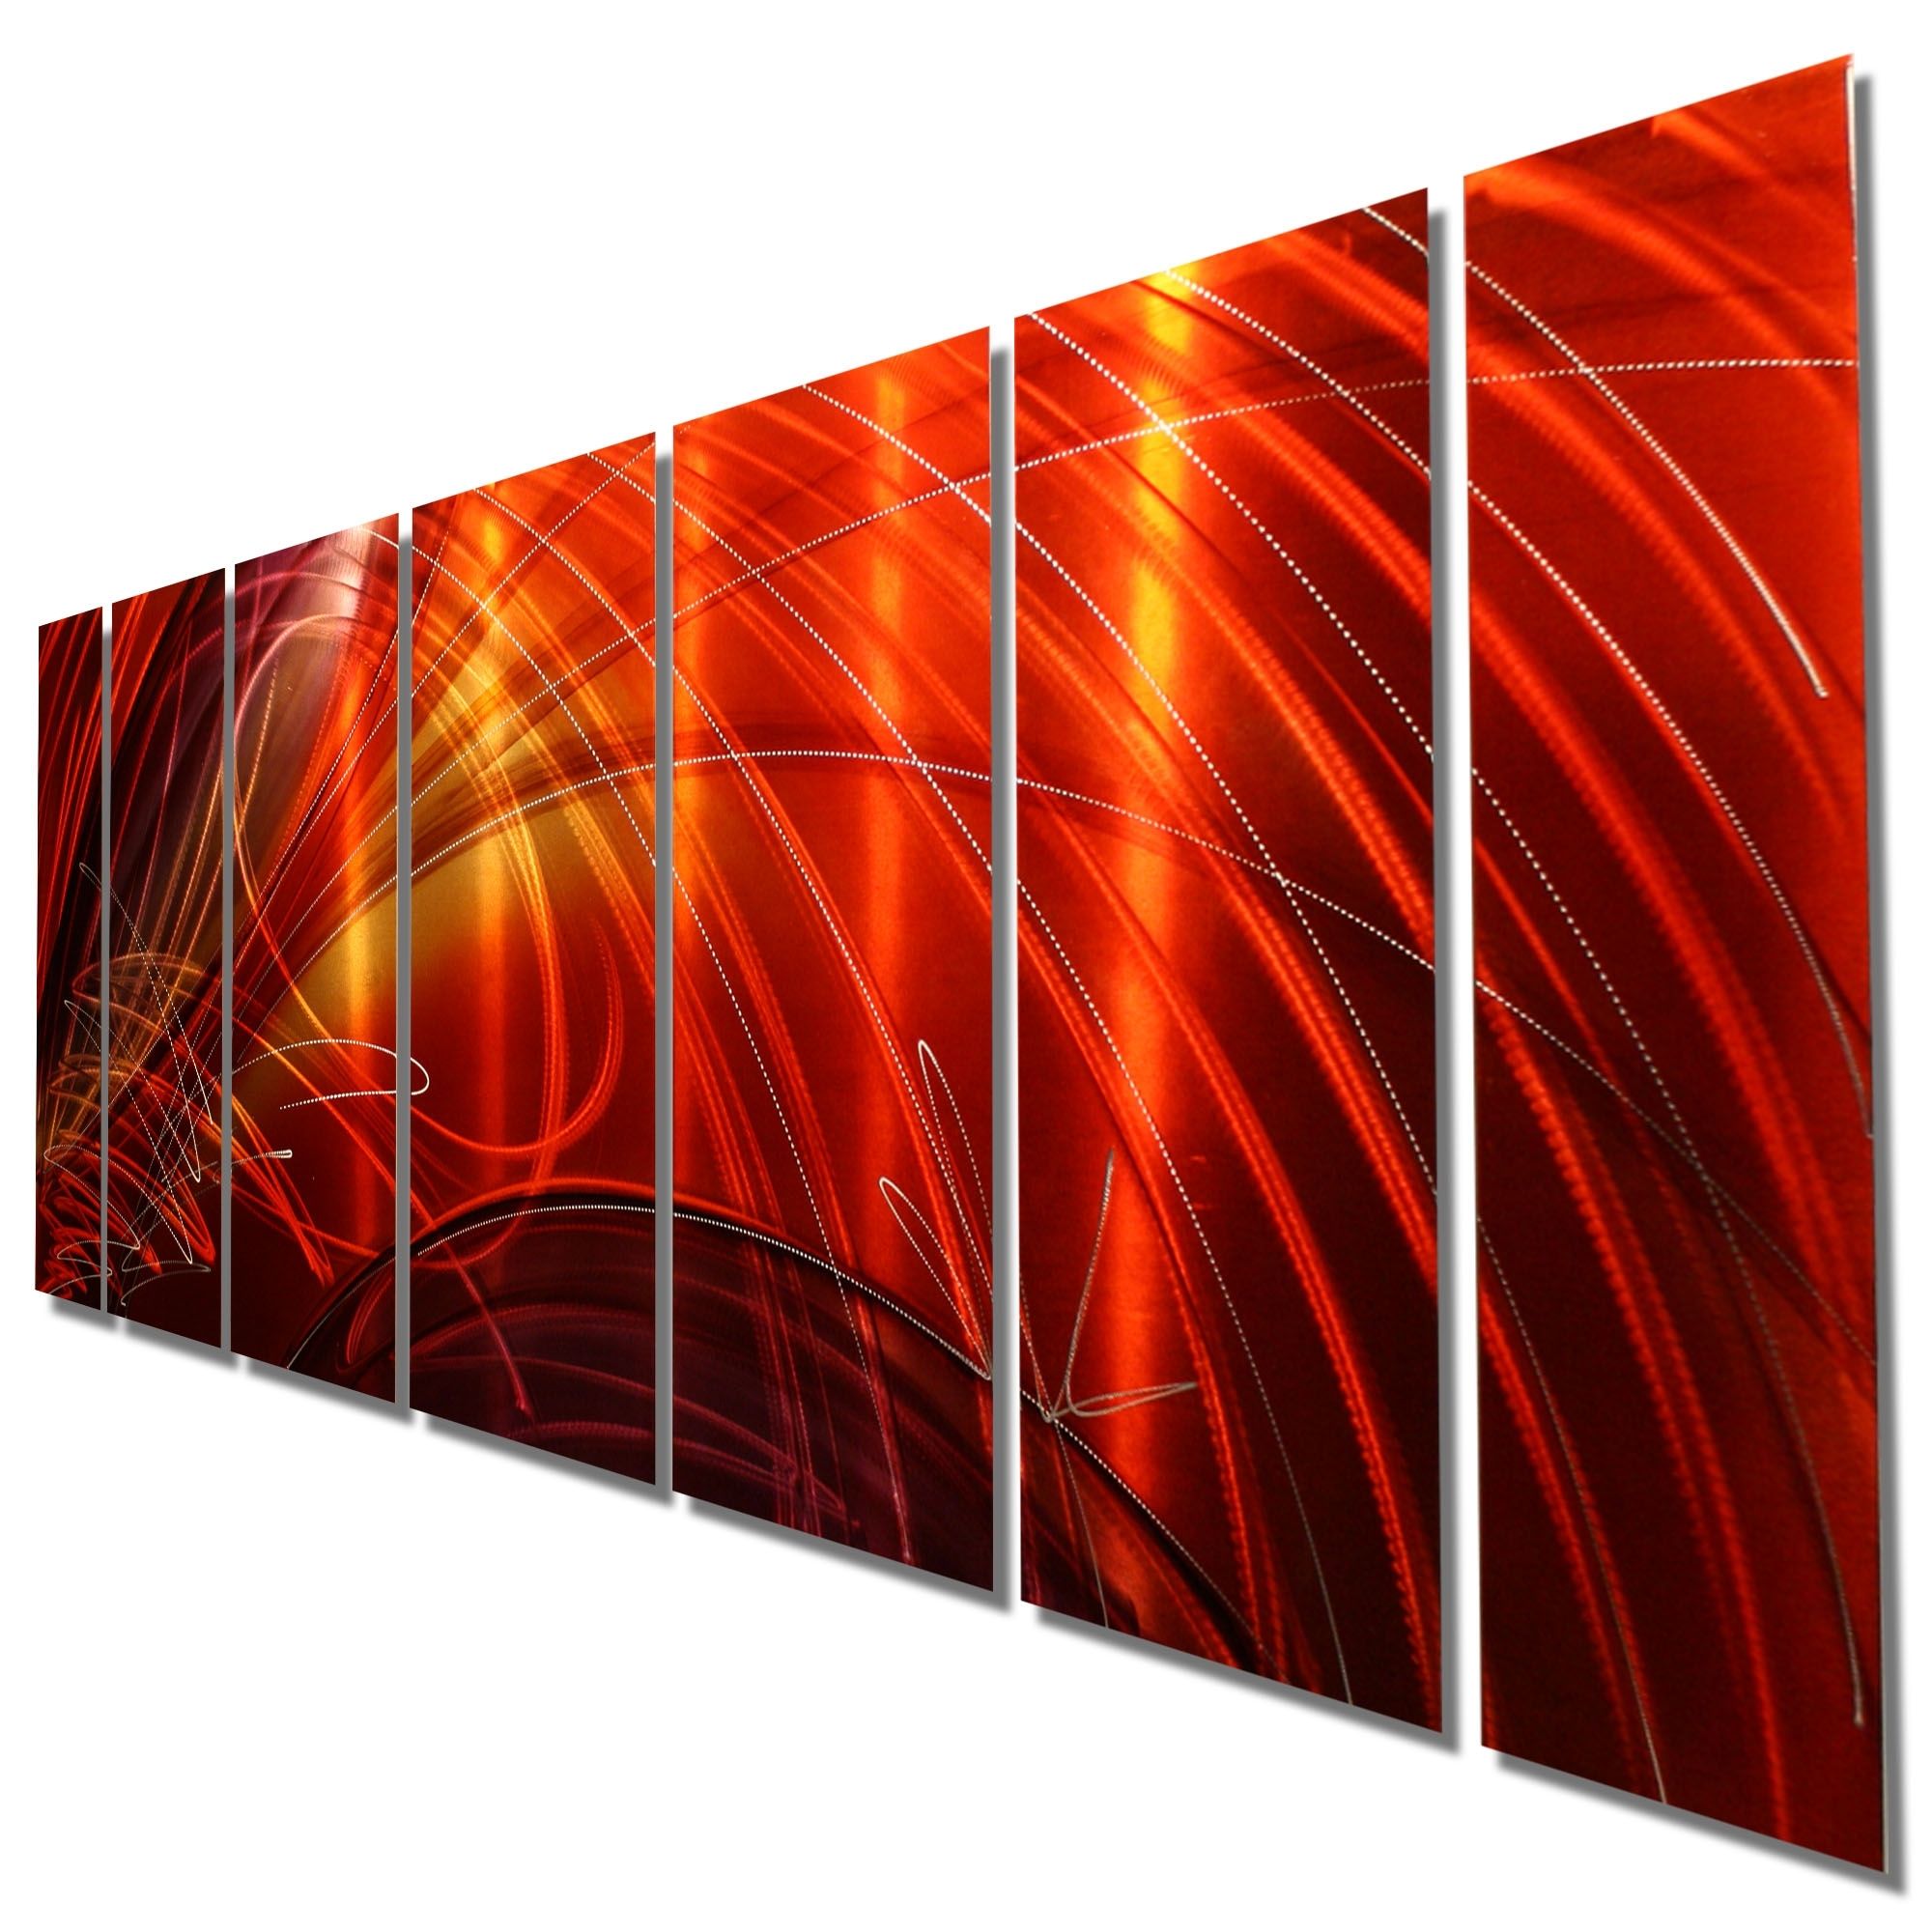 2017 Tail Spin Ii Xl Extra Large Contemporary Wall Sculptureartist For Extra Large Contemporary Wall Art (View 9 of 15)